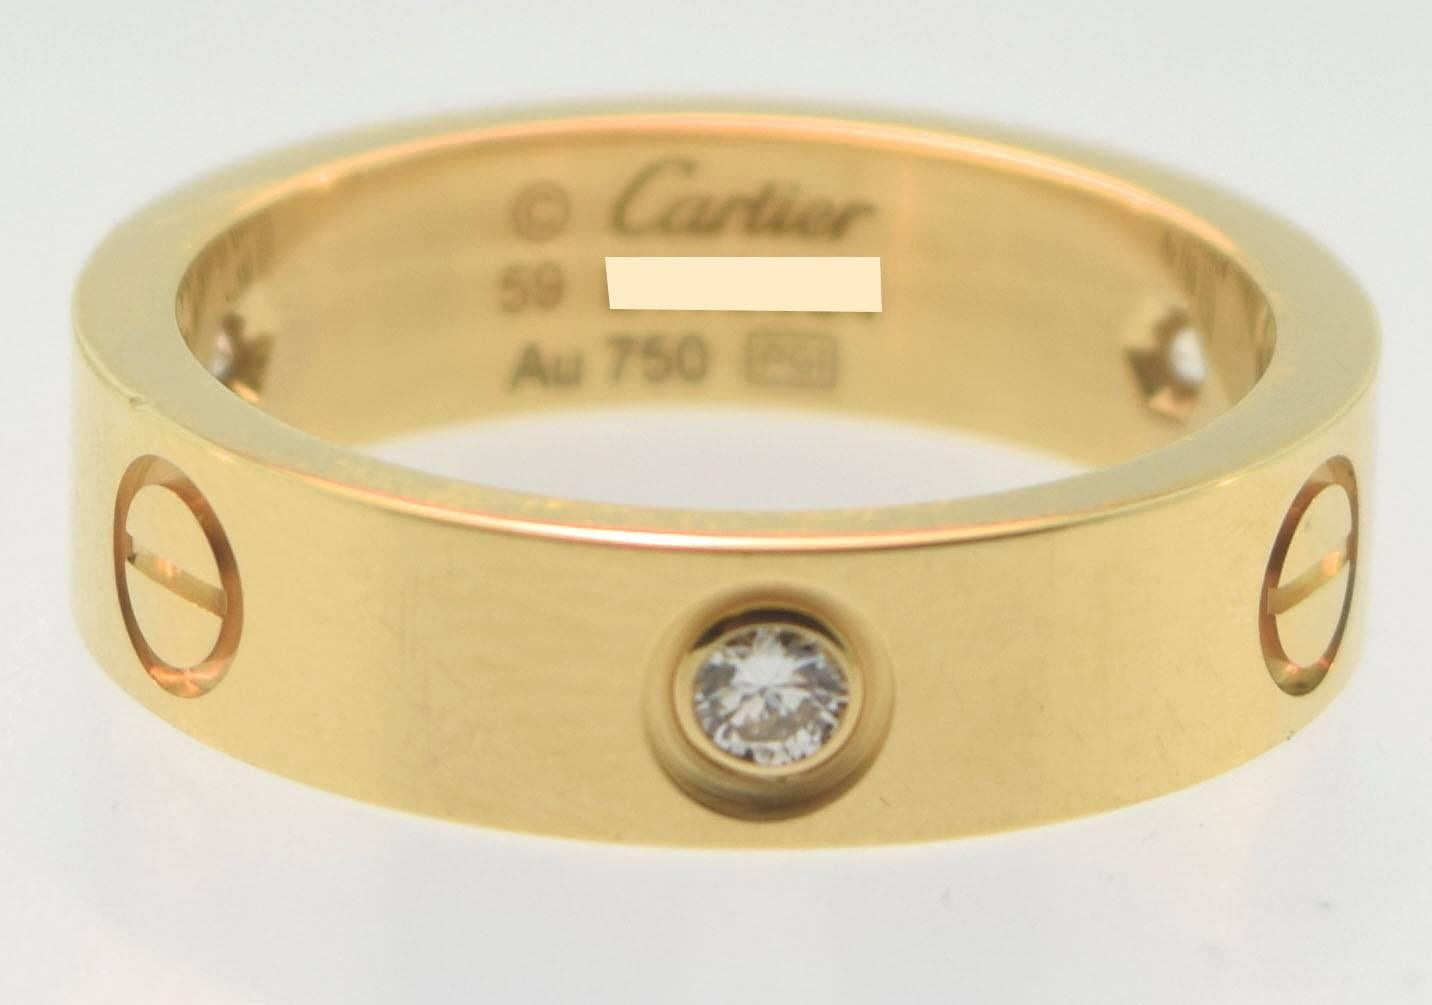 Cartier LOVE Ring, 3 Diamonds, Yellow Gold, Size 9 In Excellent Condition For Sale In Miami, FL